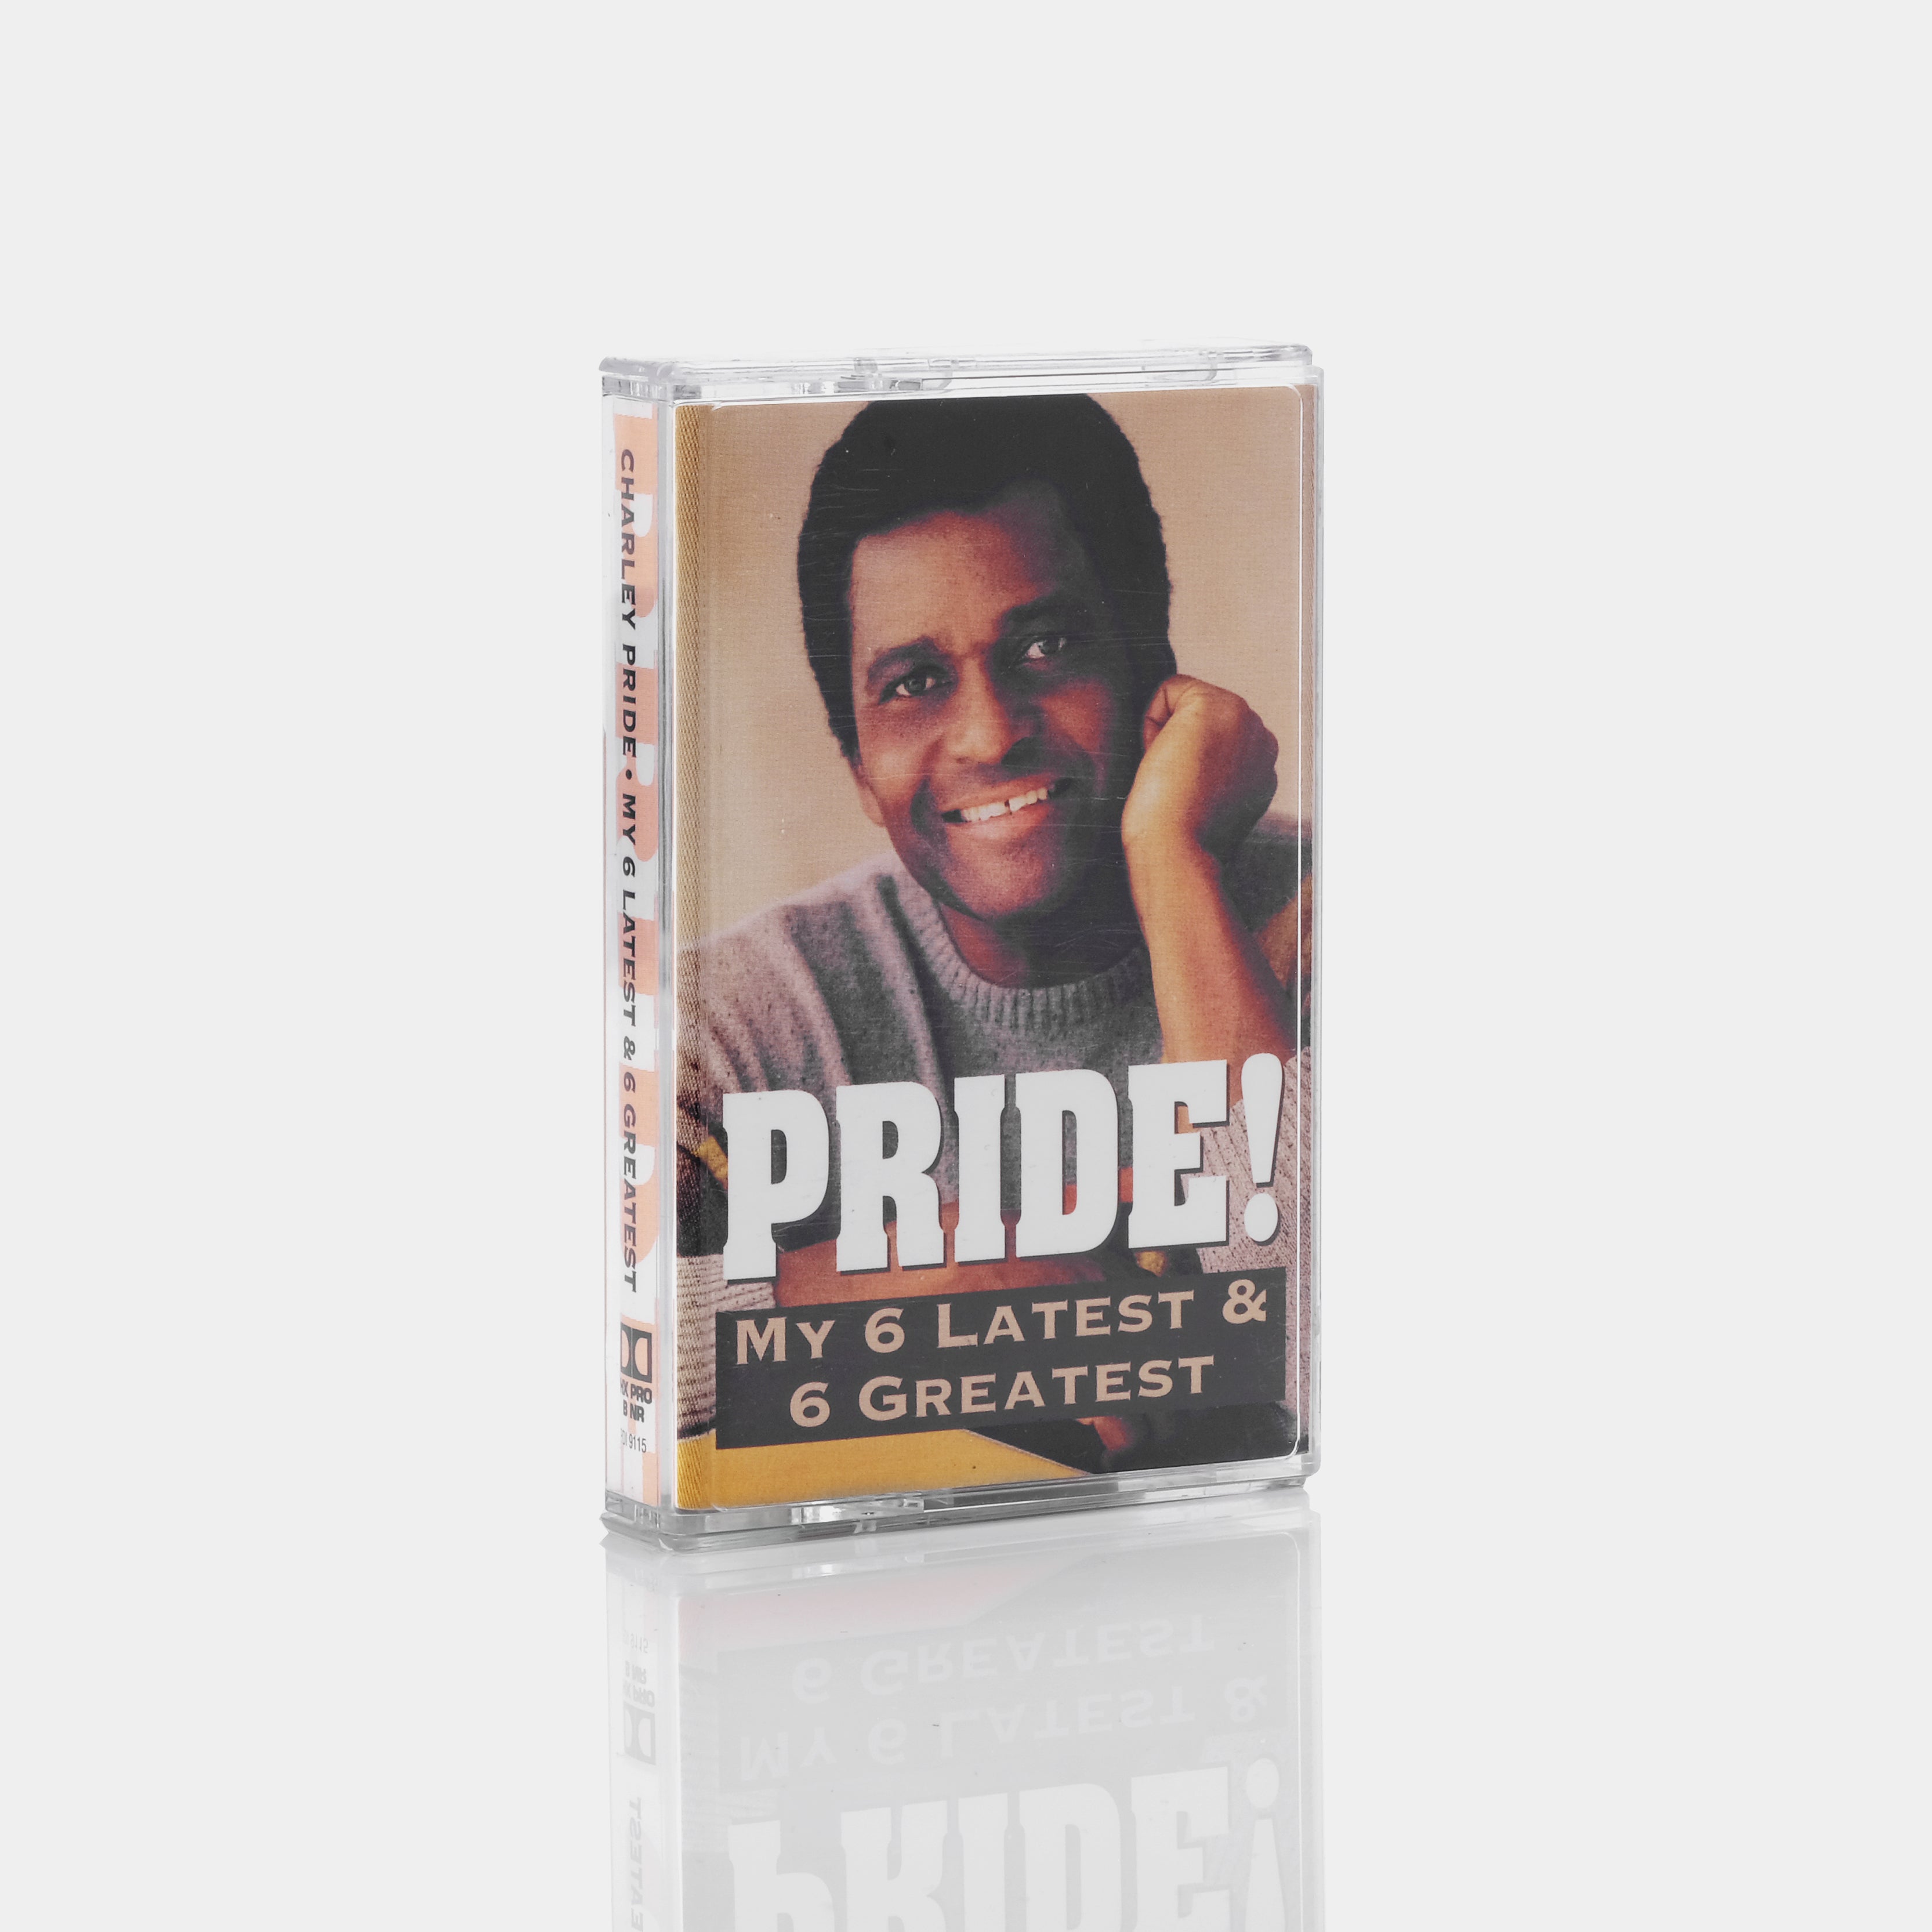 Charley Pride - Pride! - My 6 Latest & 6 Greatest Cassette Tape